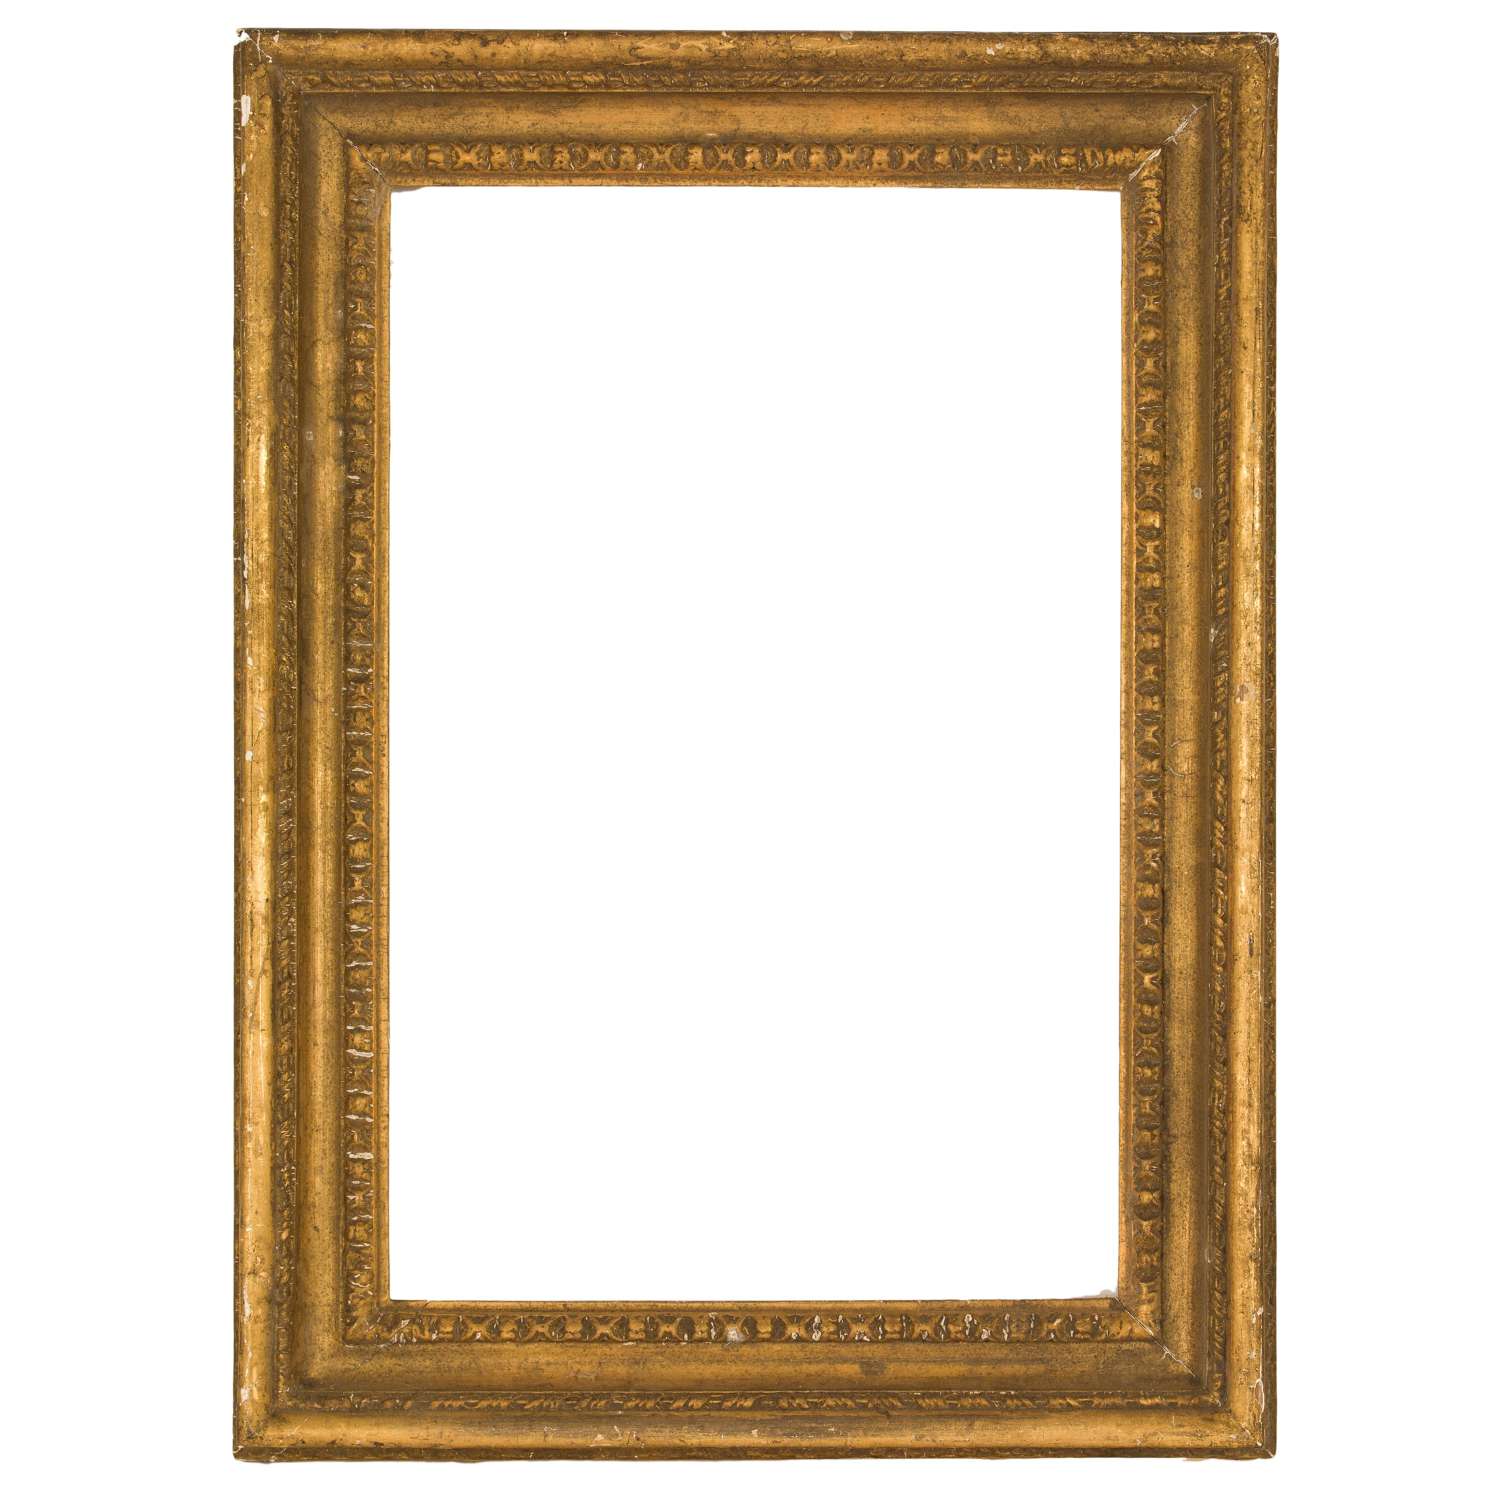 A 19th century carved wood and gesso gilt frame